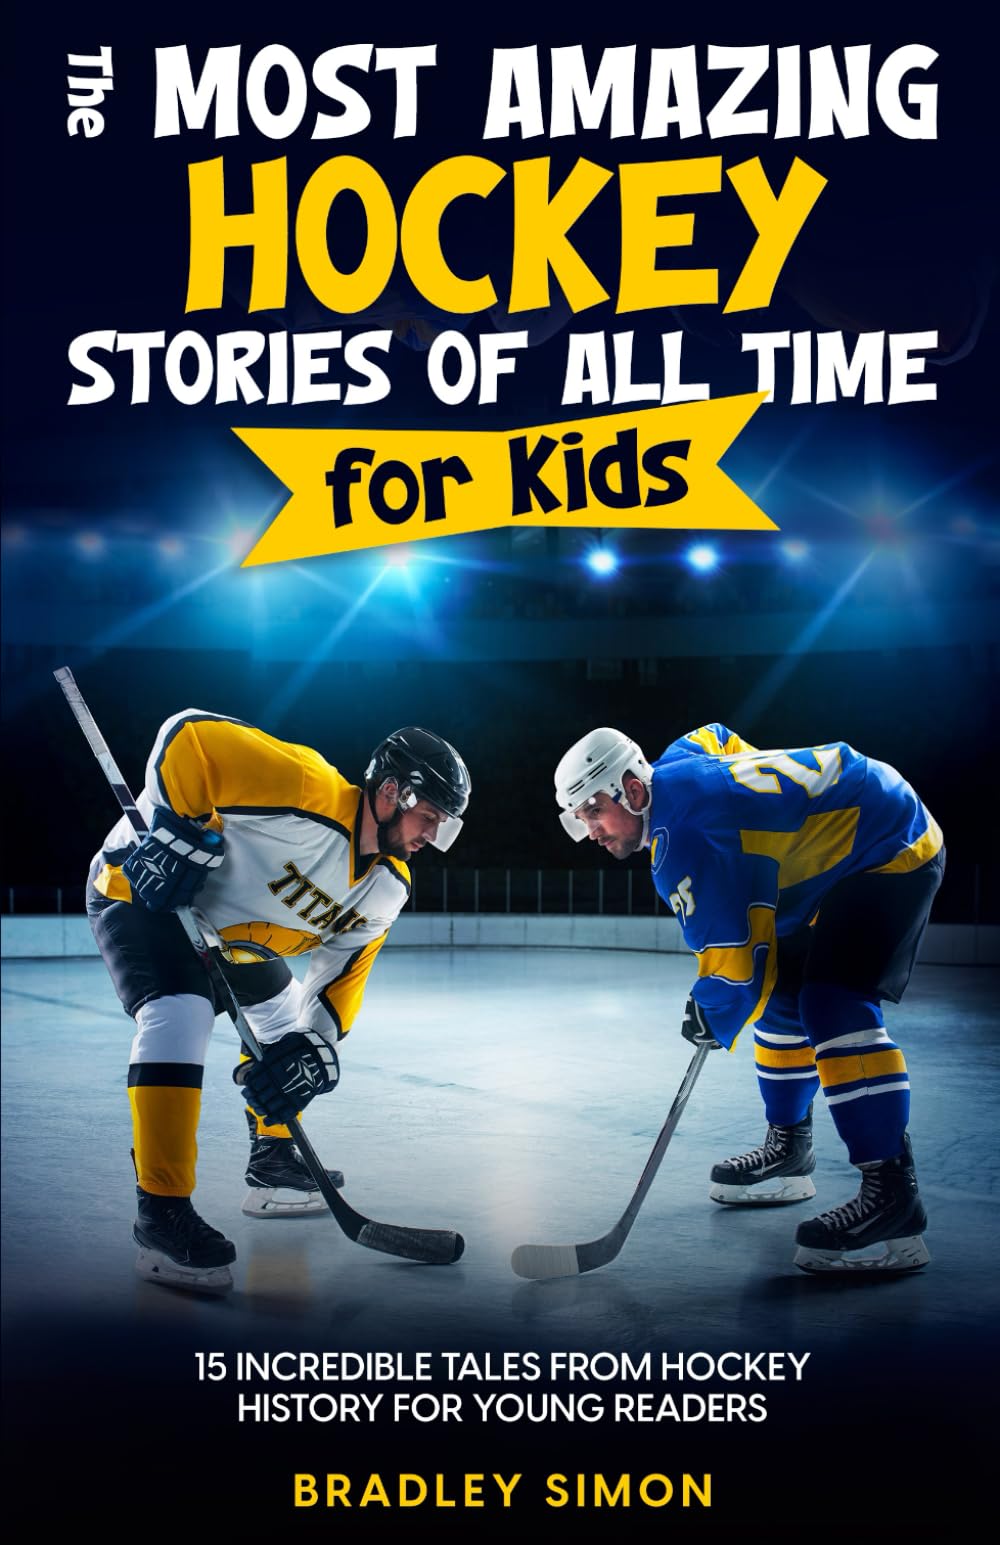 The Most Amazing Hockey Stories of All Time for Kids: 15 Incredible Tales From Hockey History for Young Readers